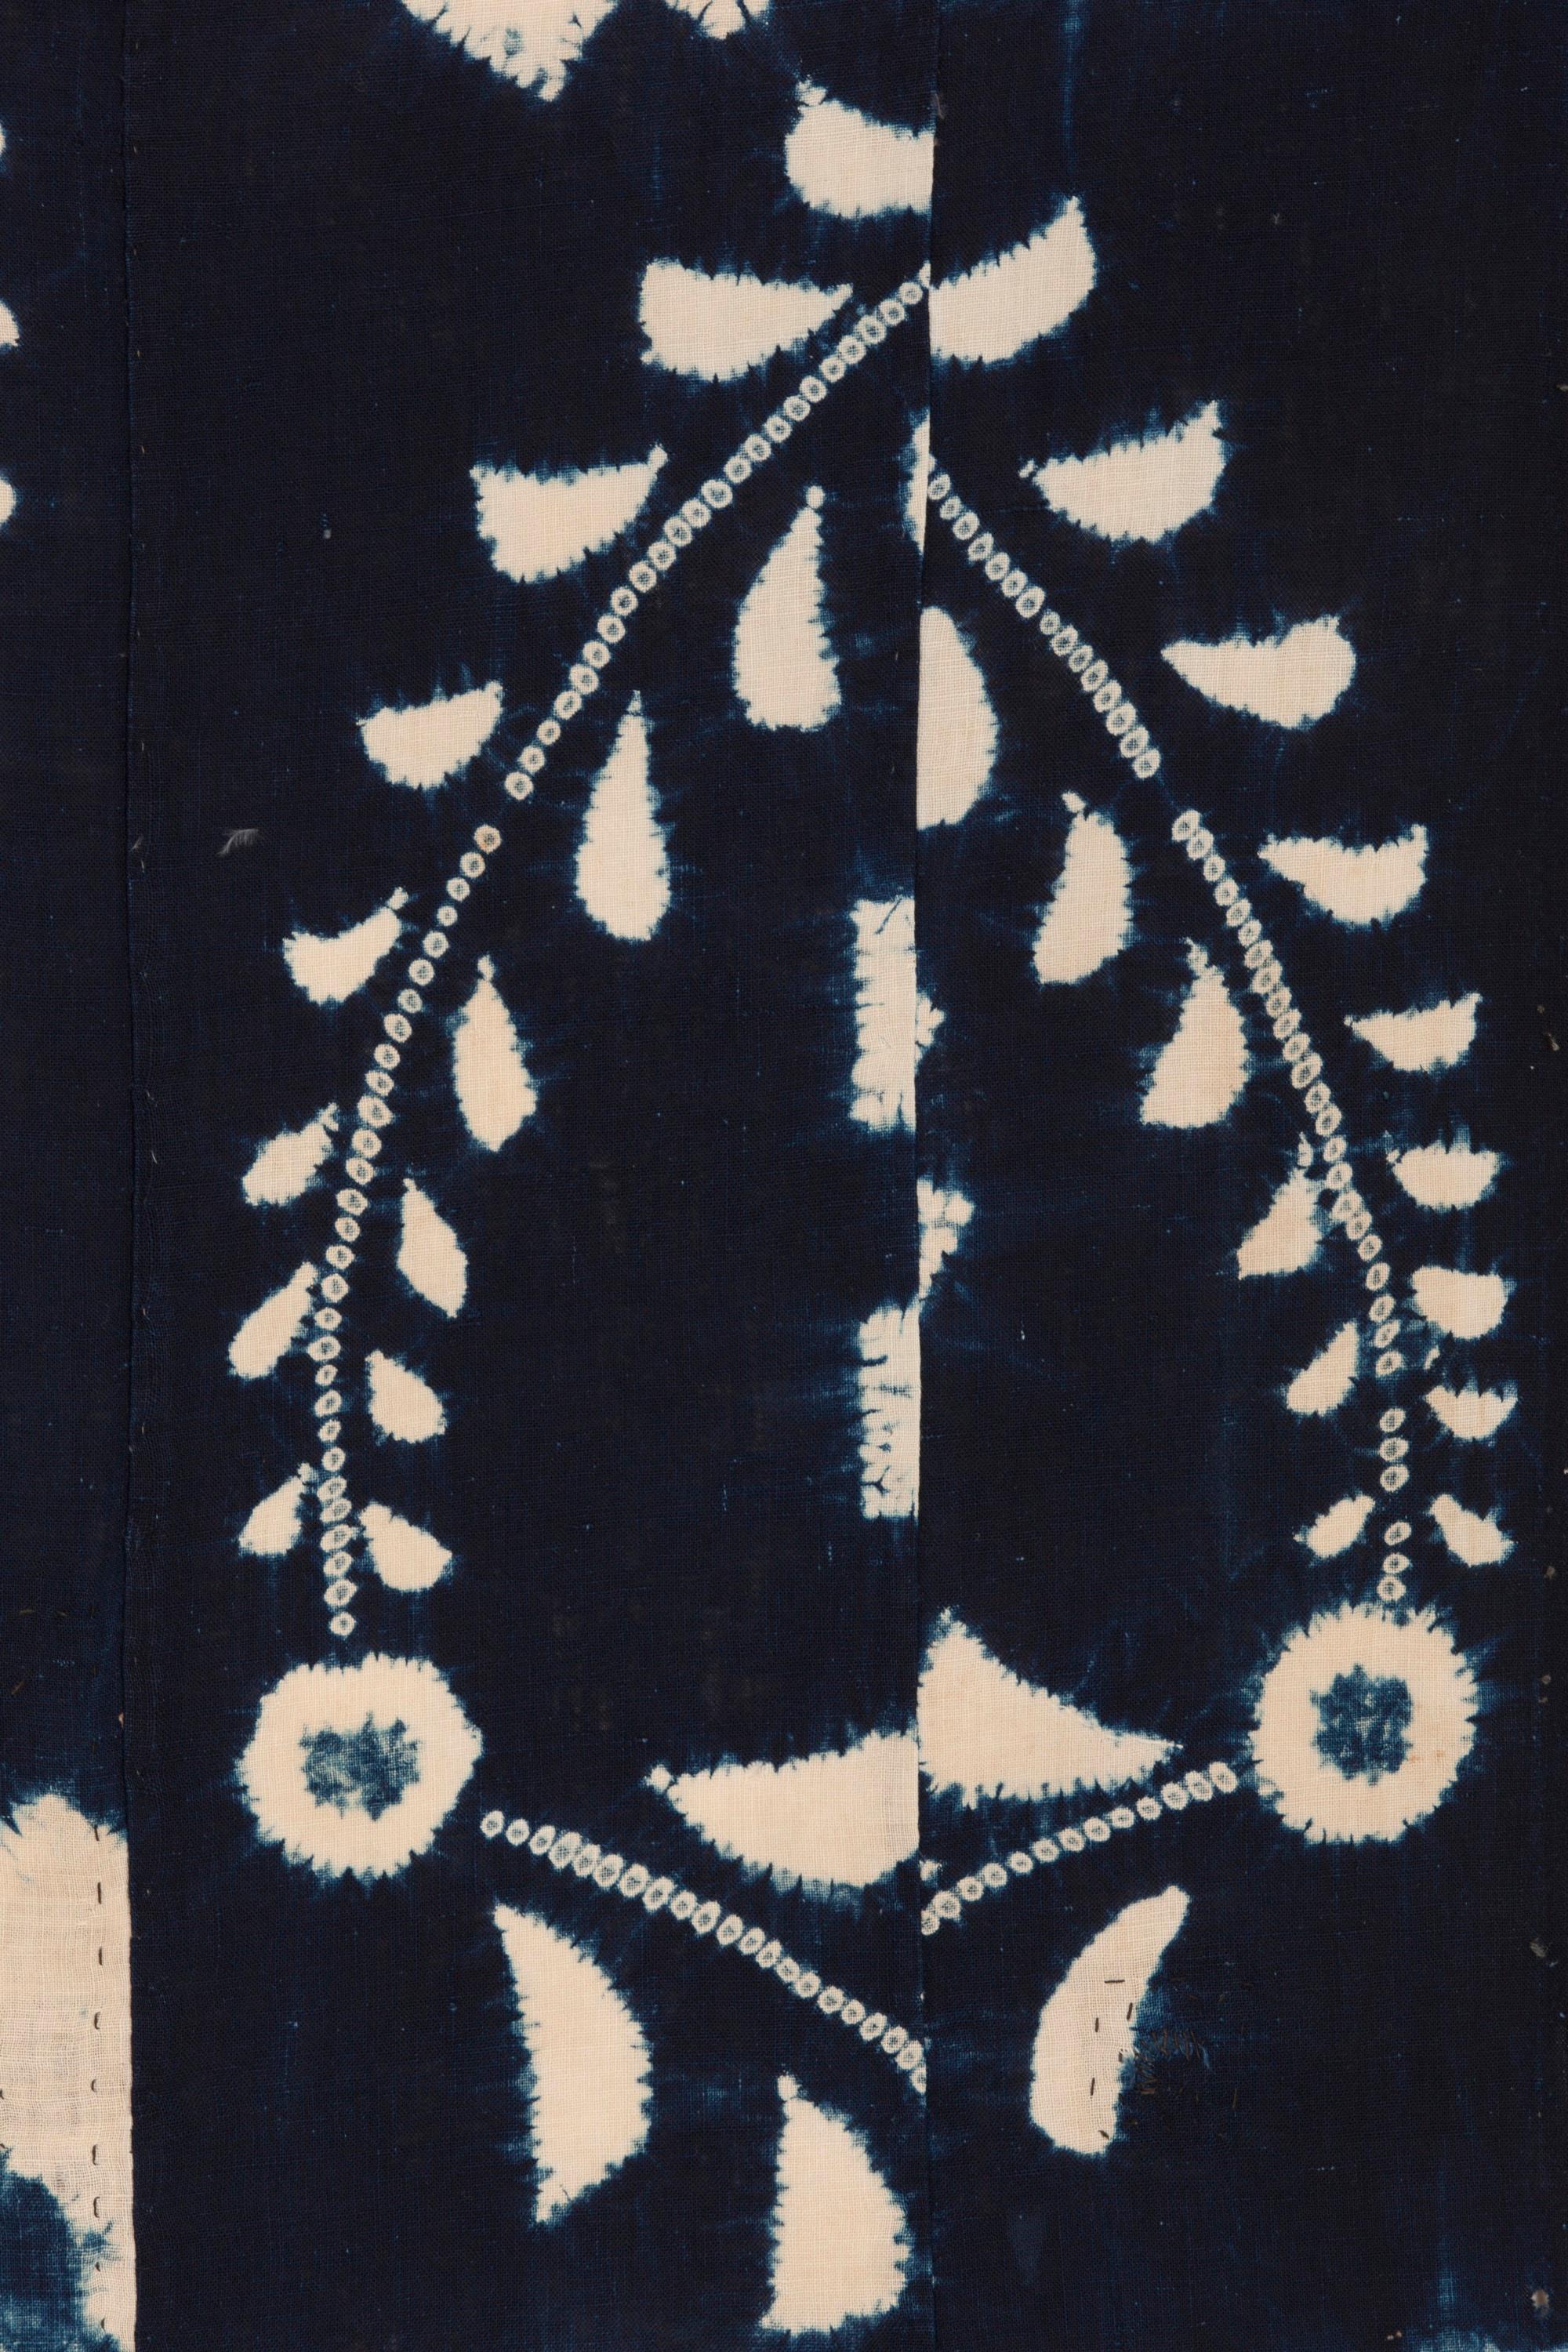 An Arimatsu indigo shibori futon cover from the late Meiji period, 3 panels wide, left and right panels are patched and darned, possibly repurposed kimono, handspun cotton, dyed using dark indigo.